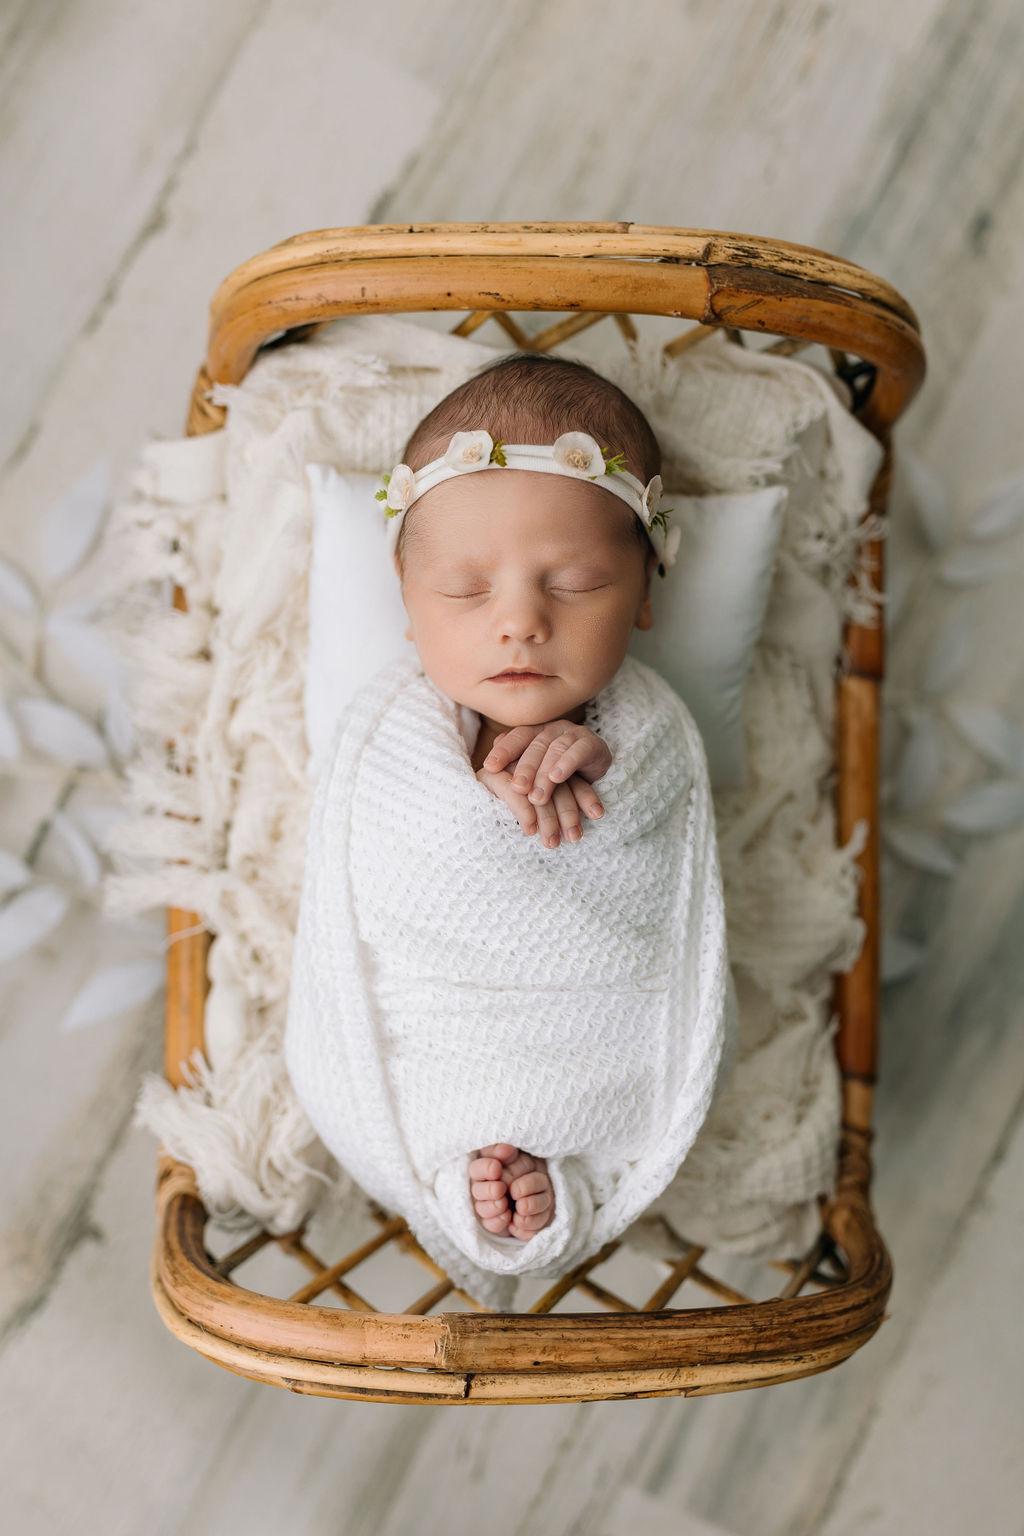 A newborn baby sleeps in a white swaddle with toes and fingers sticking out and a white flower headband in a tiny wicker bed daycare staunton va